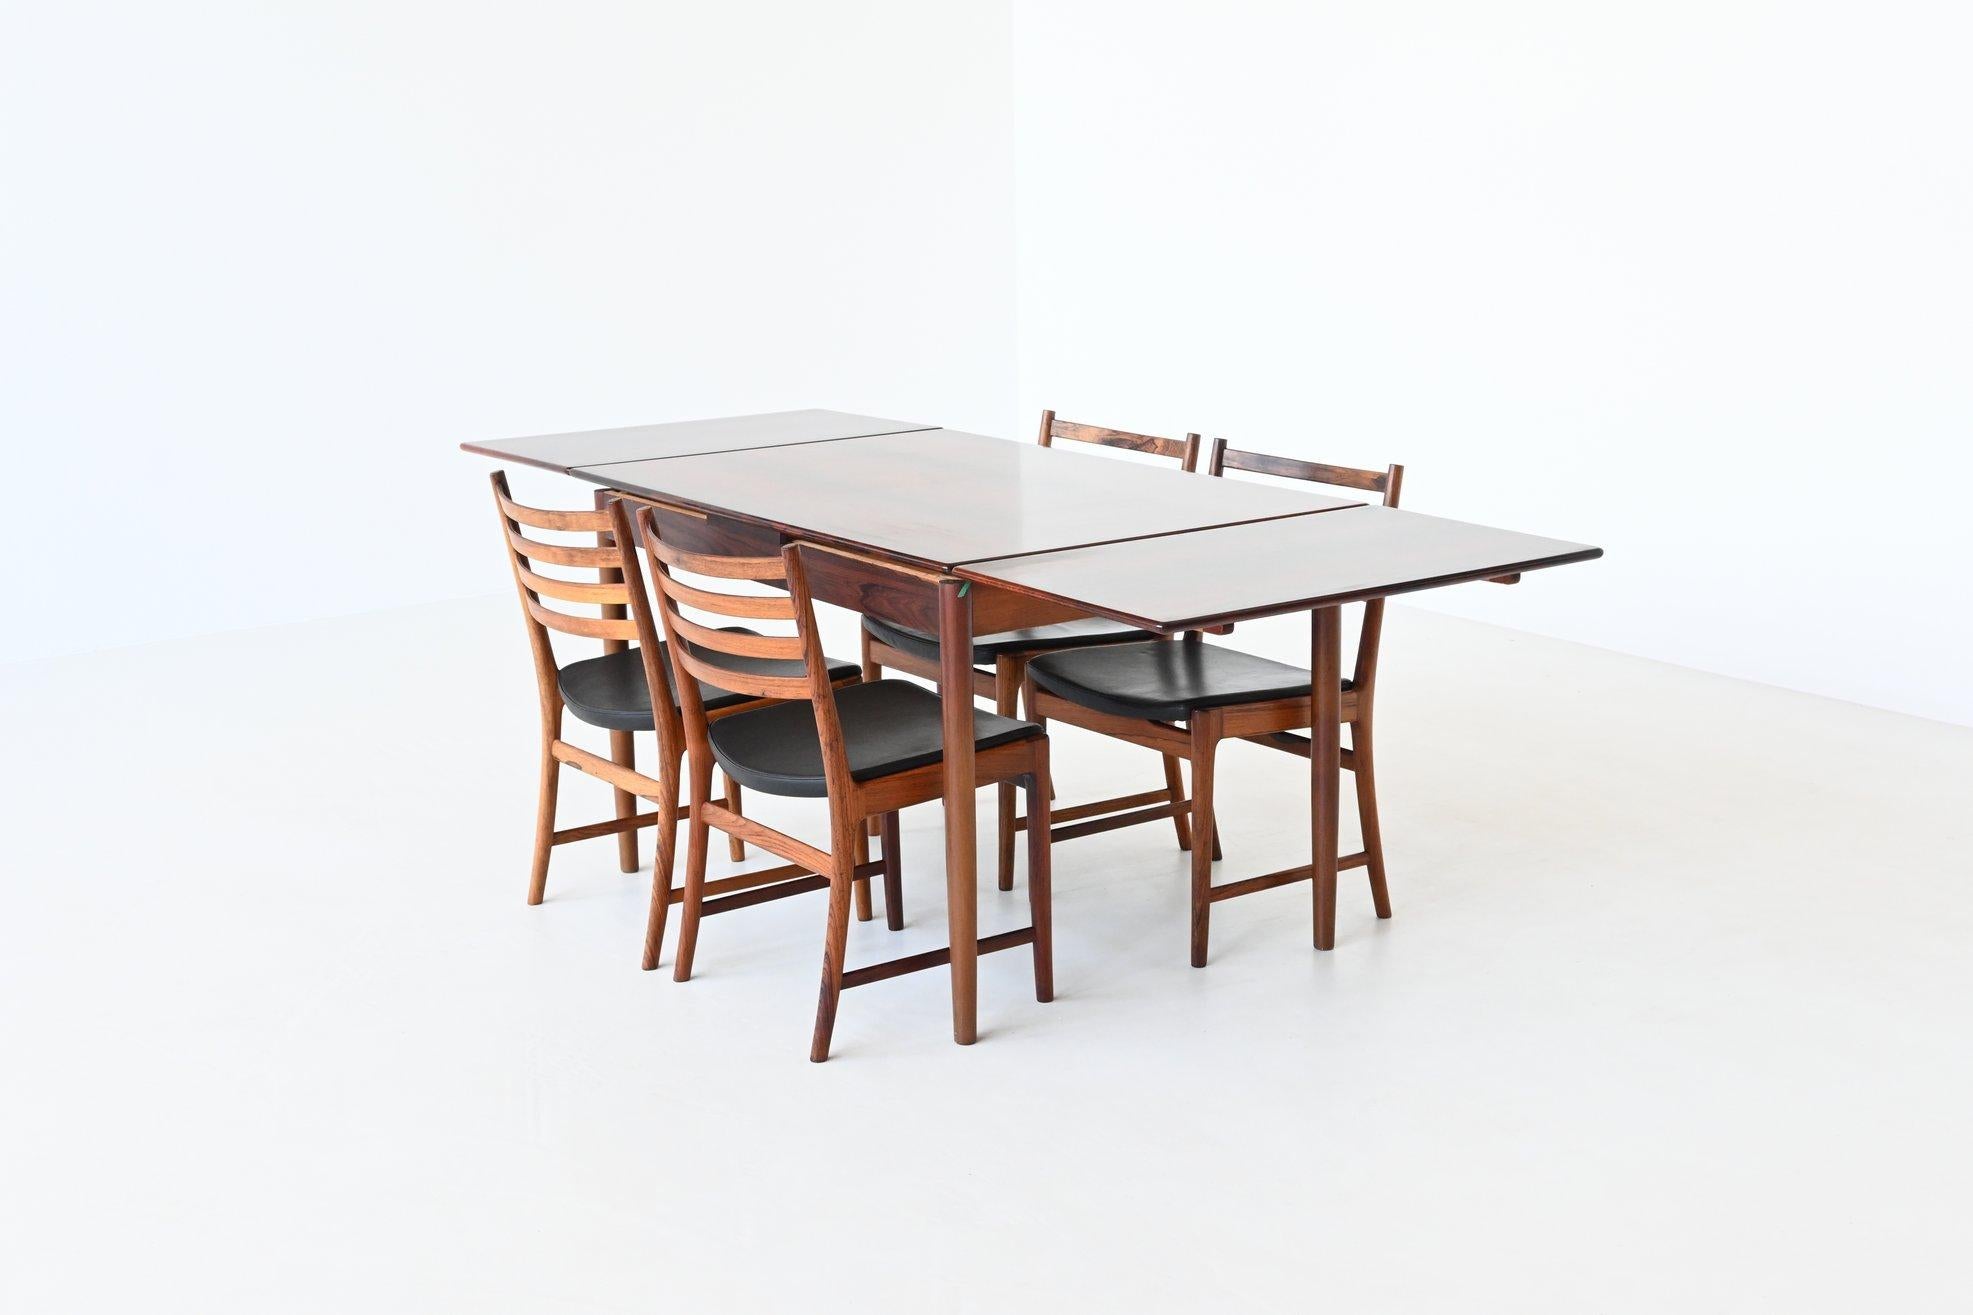 Beautiful rosewood extendable dining table by unknown designer or manufacturer, Denmark 1960. This well-crafted table is made of rosewood and has an amazing grain to the warm rosewood veneer. It can be extended from 123 cm to 223 cm by pulling out